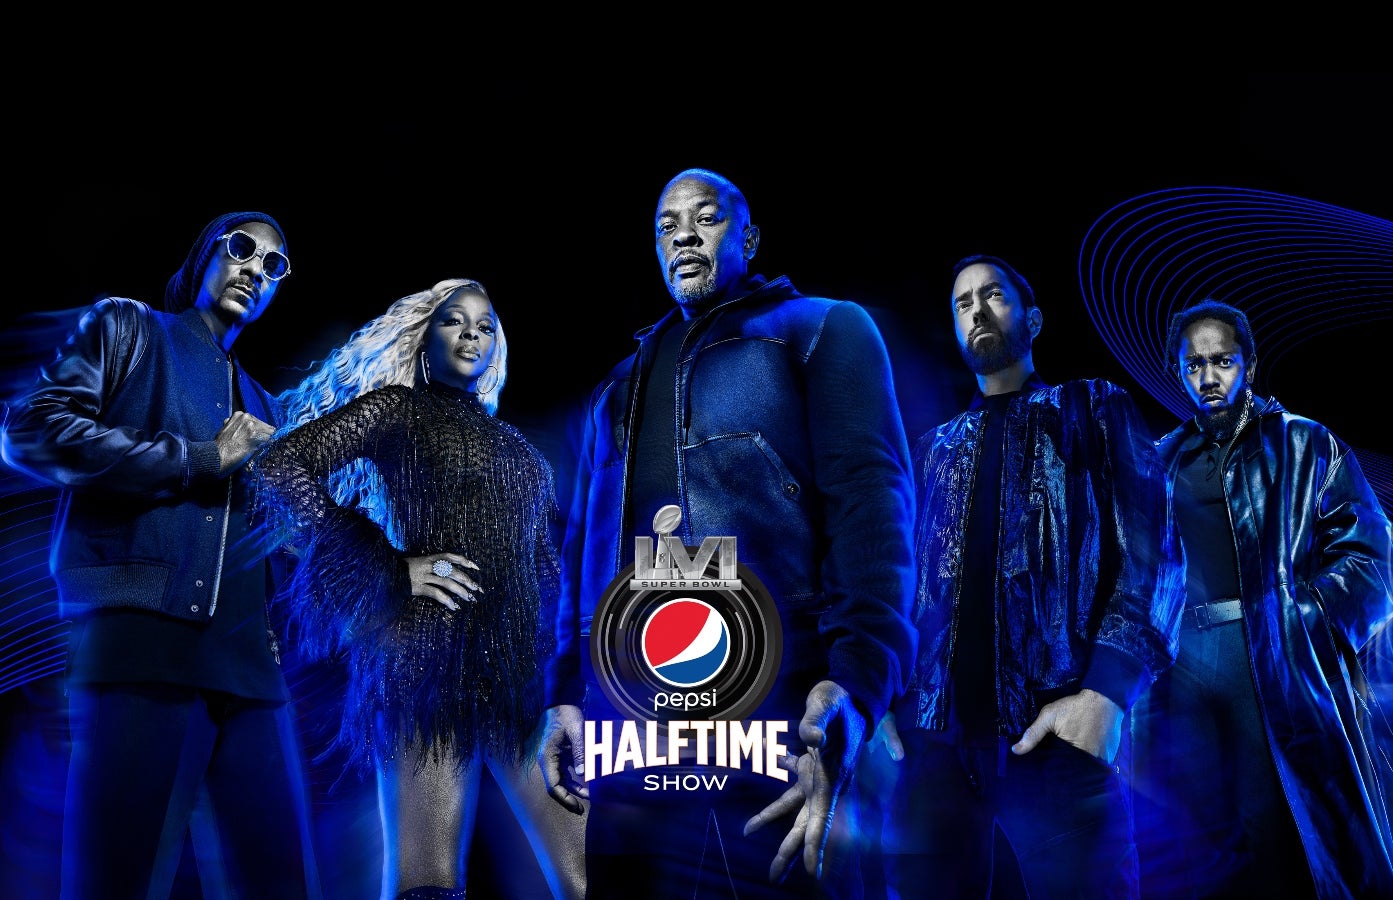 Mary J. Blige, Kendrick Lamar Among Epic Musical Lineup For The 2022 Super Bowl Halftime Show